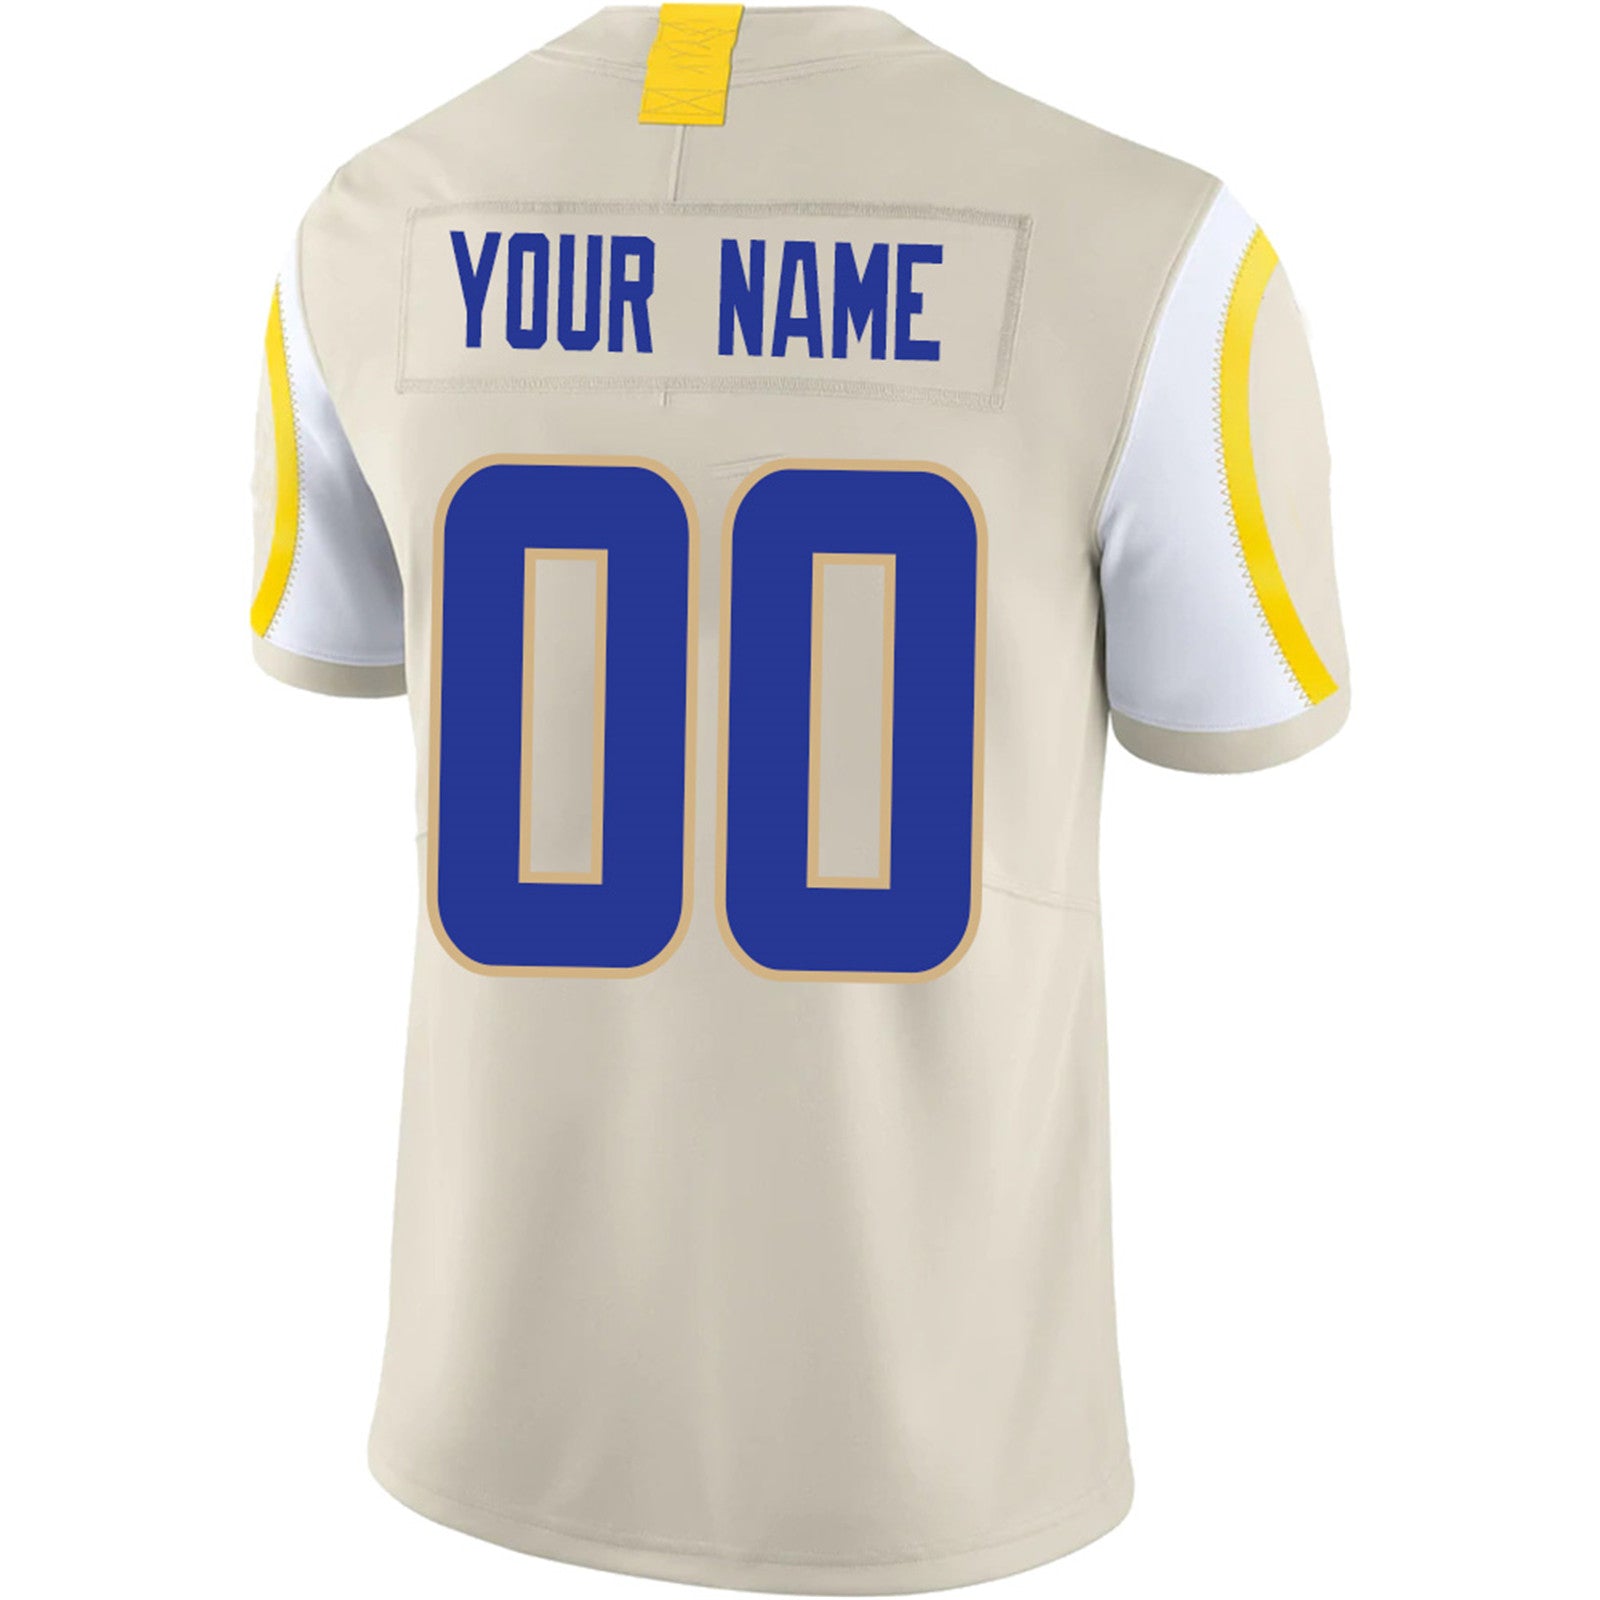 Custom LA.Rams Football Jerseys Team Player or Personalized Design You –  Puhics